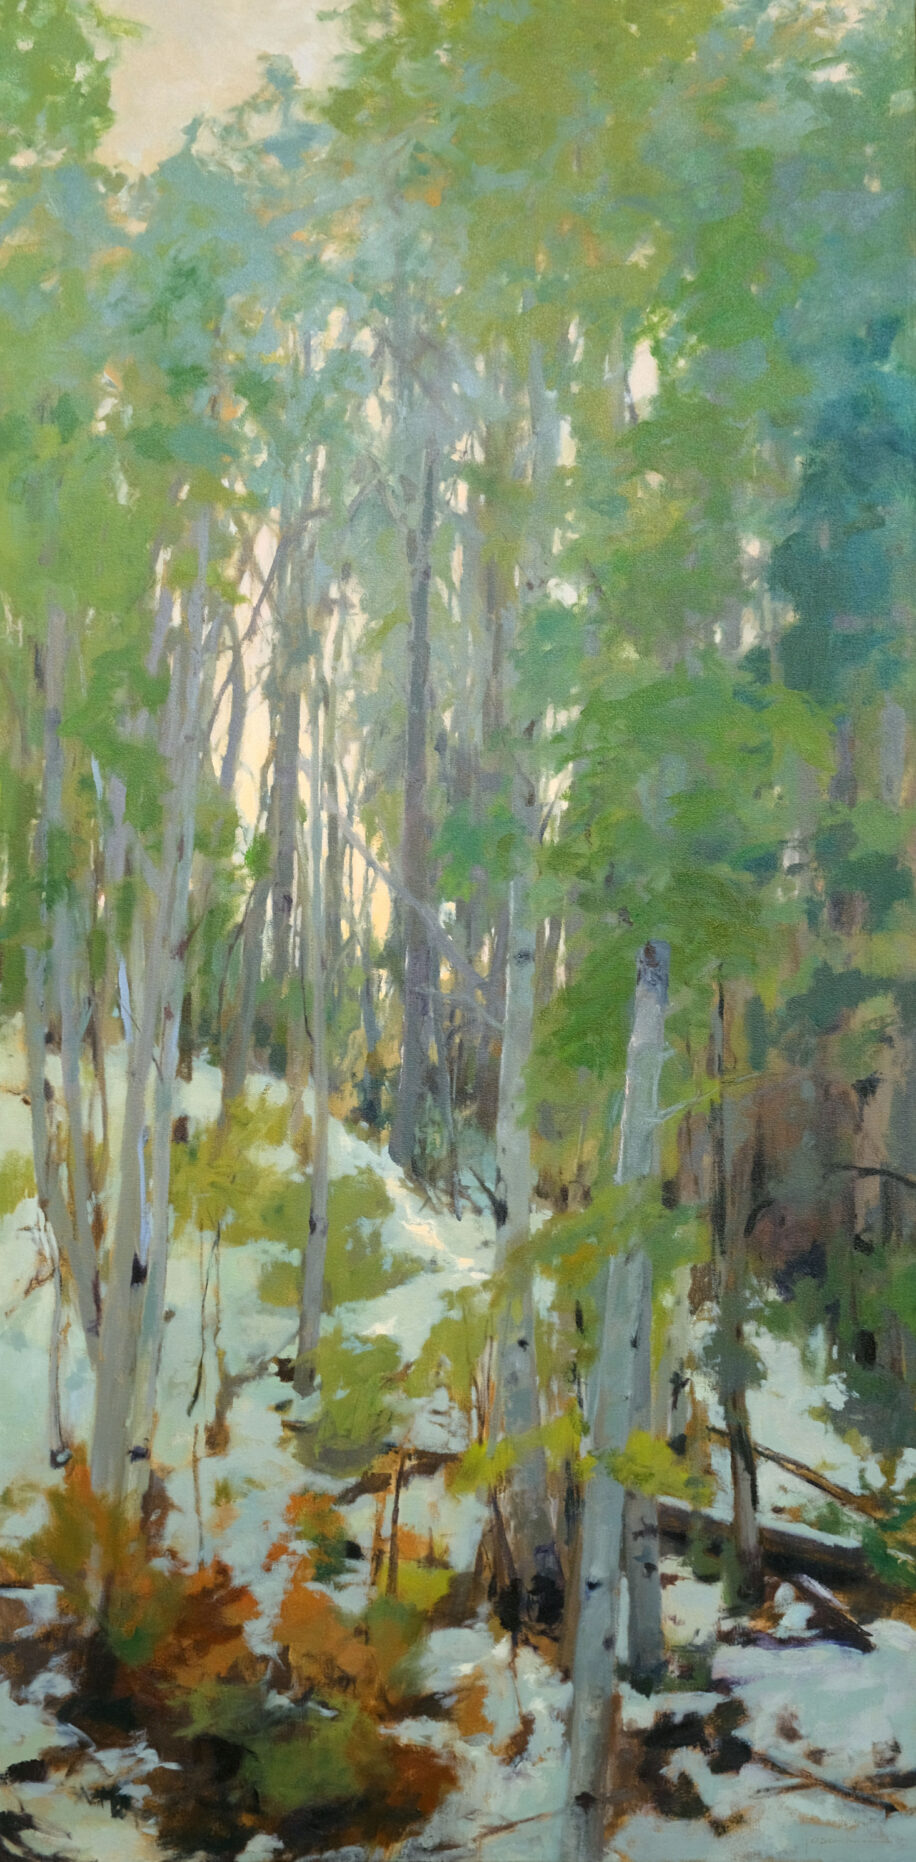 Early Winter by Maria Josenhans at The Avenue Gallery, a contemporary fine art gallery in Victoria, BC, Canada.